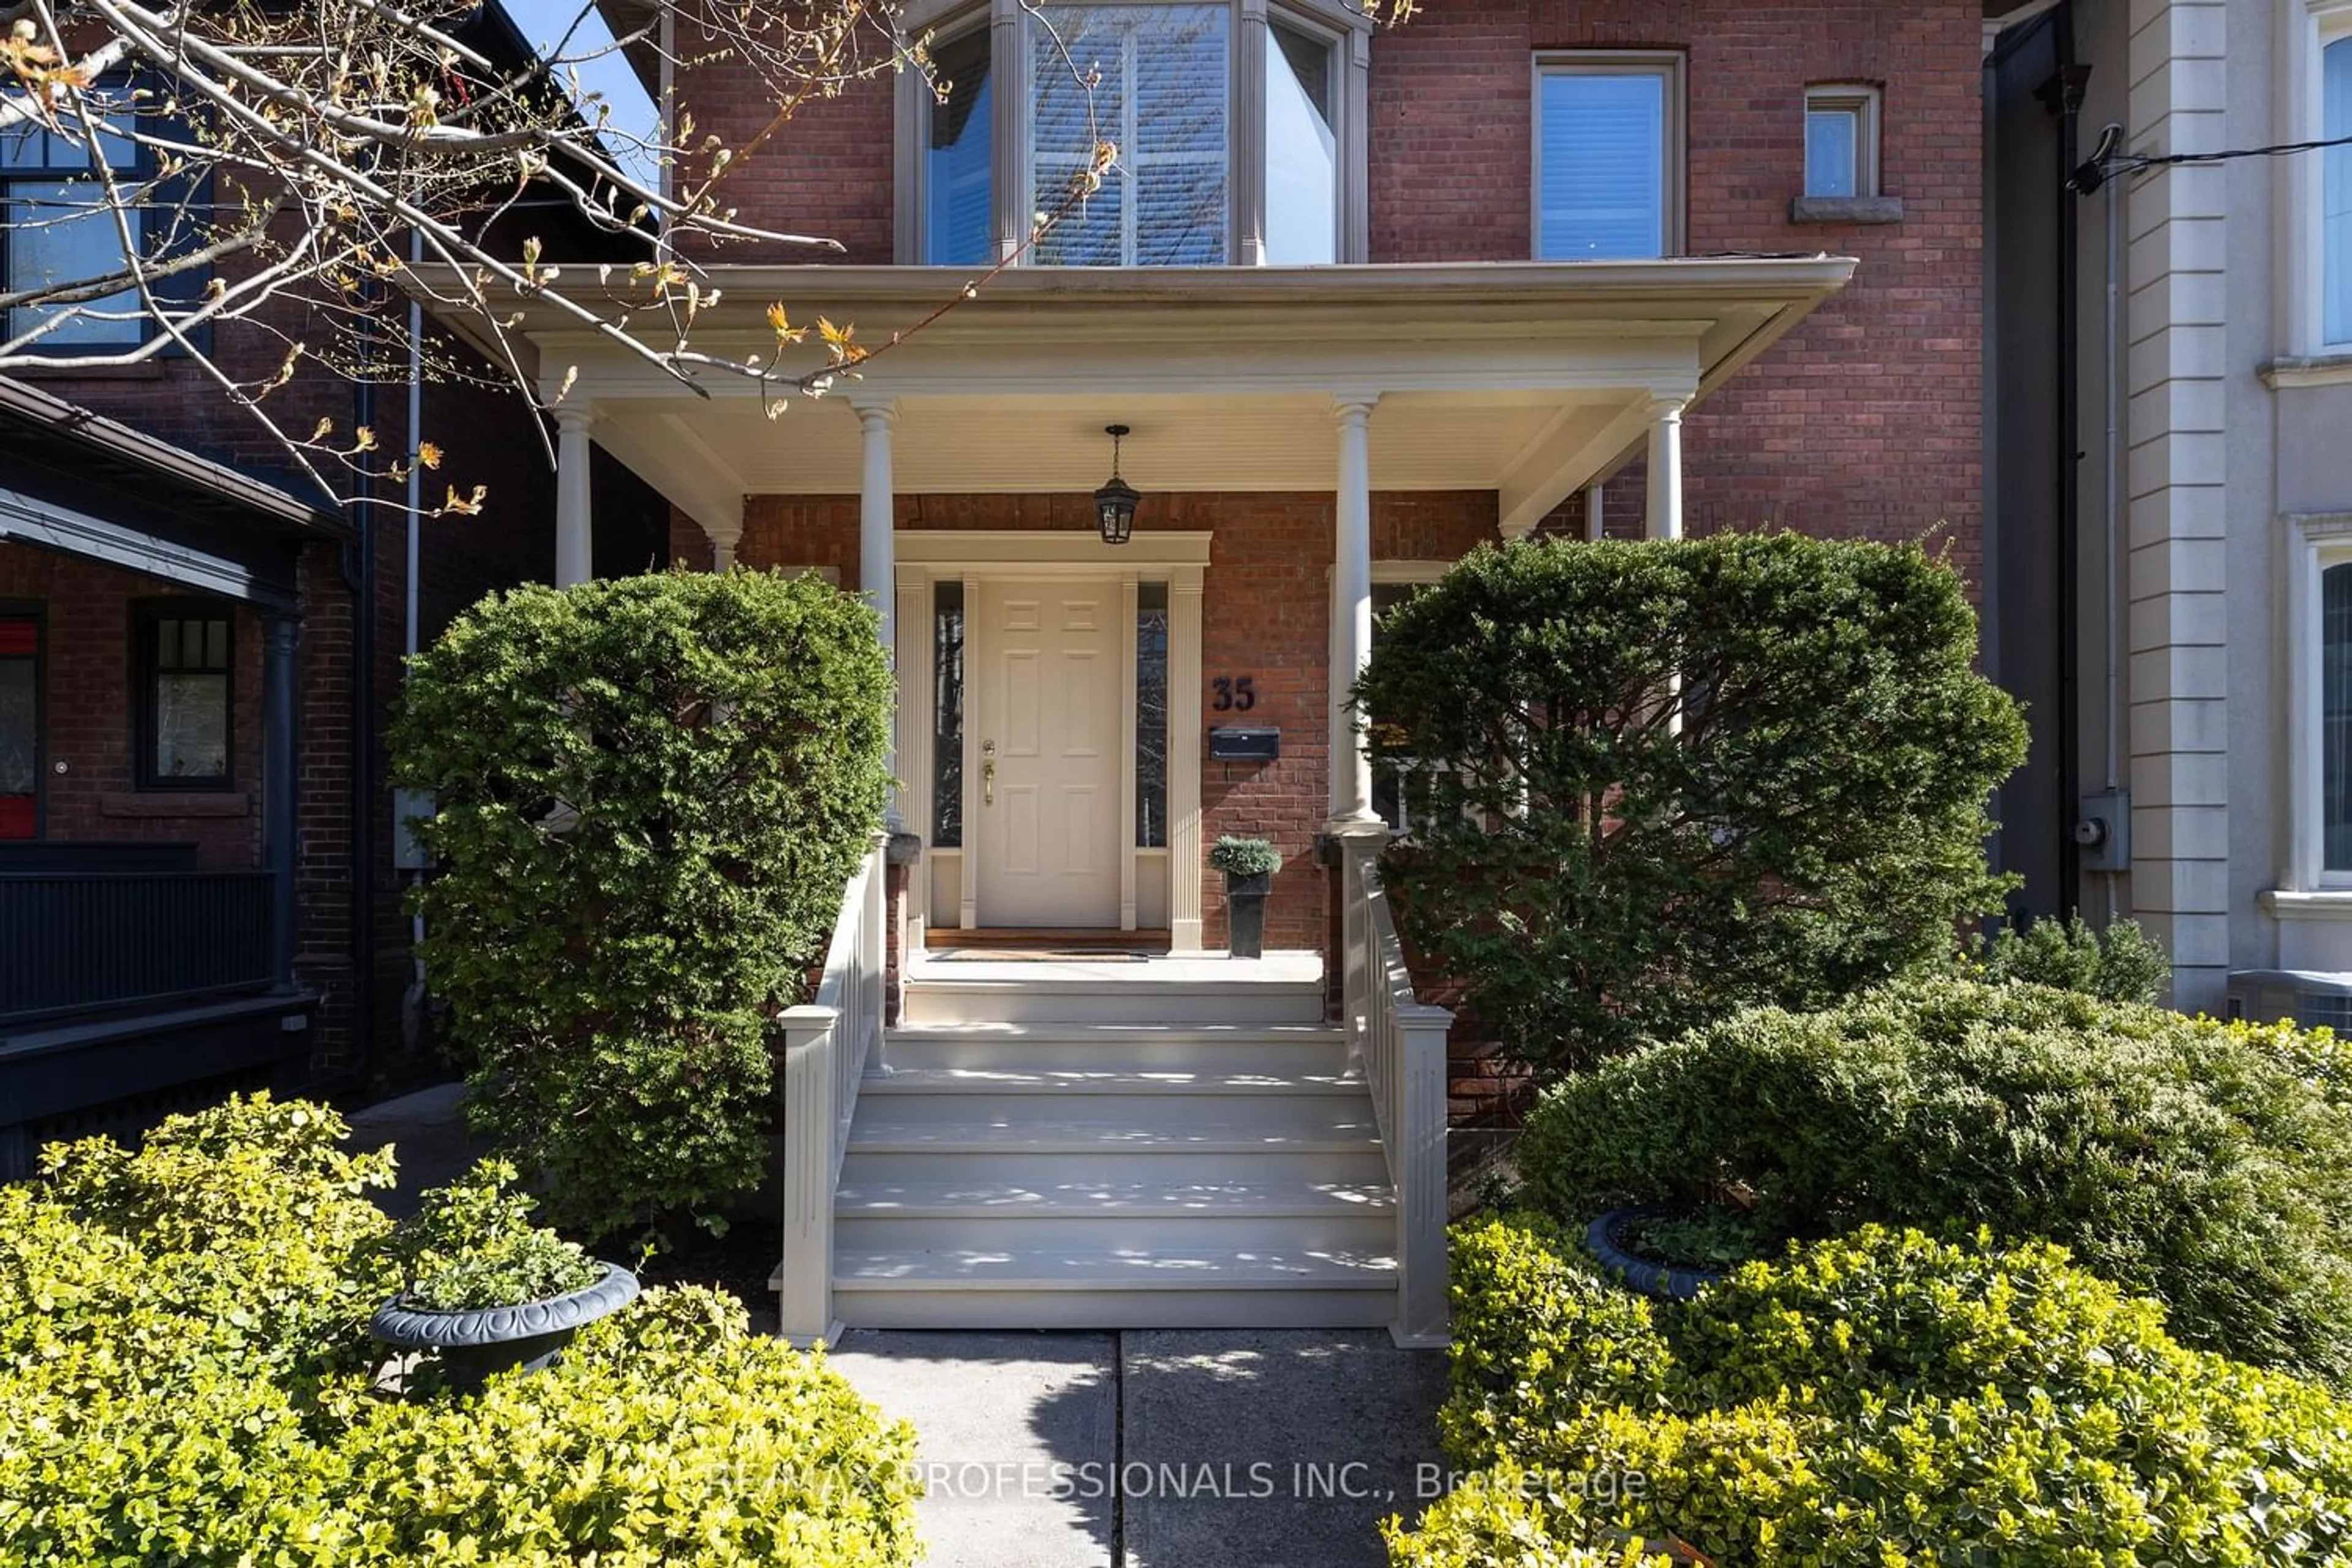 Home with brick exterior material for 35 Chicora Ave, Toronto Ontario M5R 1T7